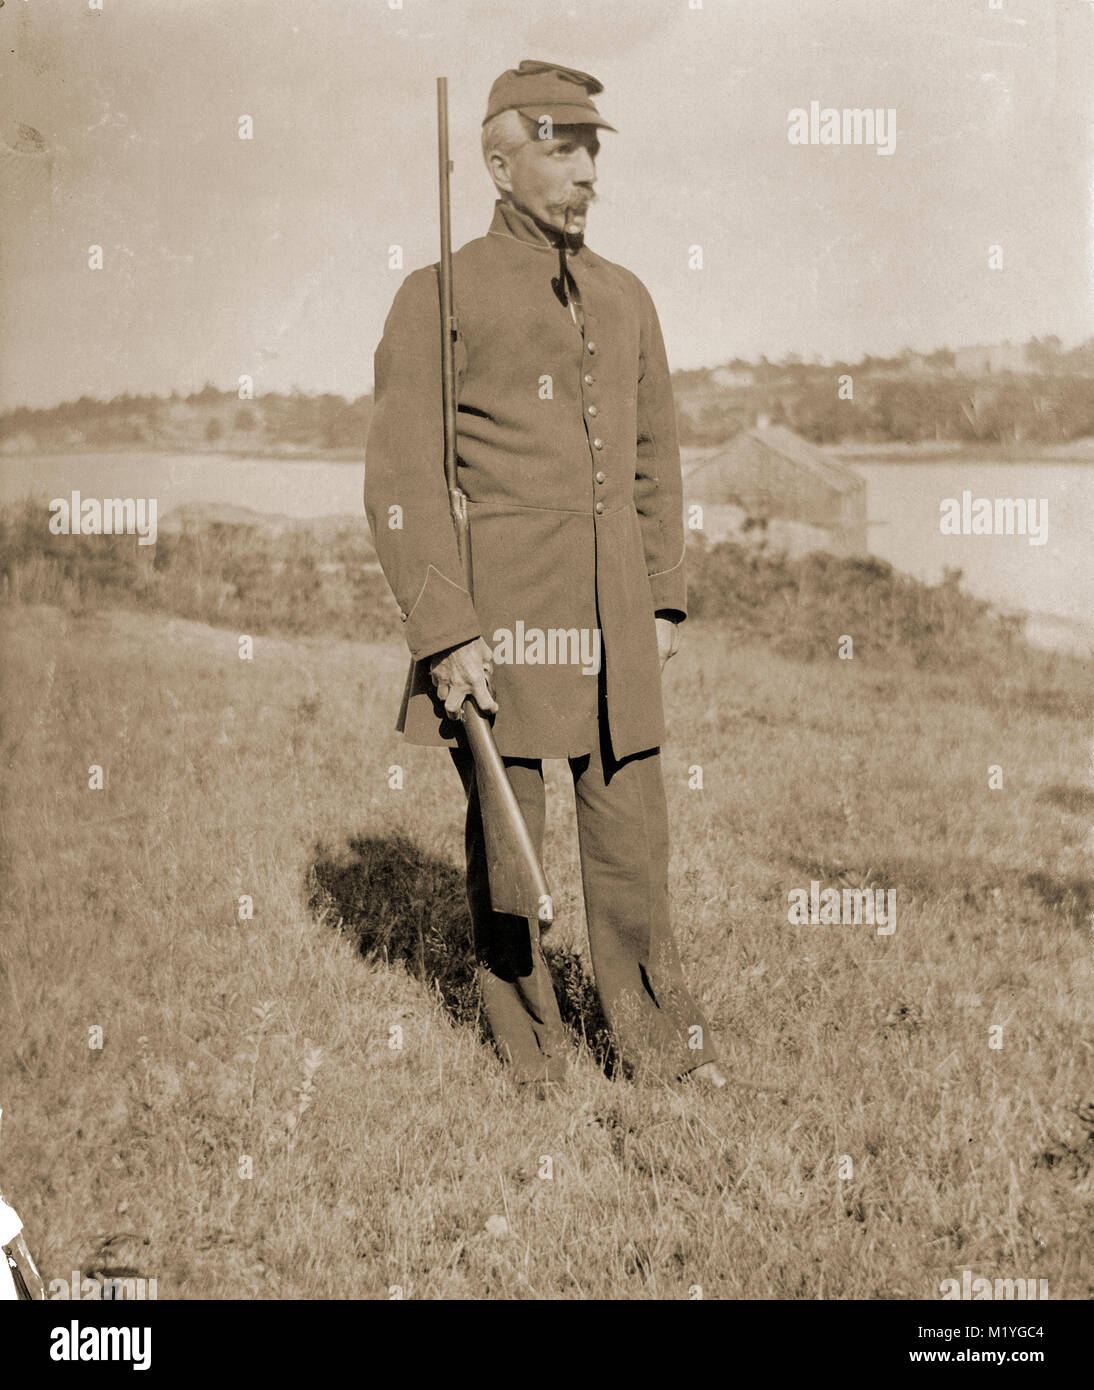 Antique circa 1905 photograph, elderly gentleman with rifle in military uniform. Location is in or near Riggsville (now Robinhood), Maine in Sagadahoc County, USA. Stock Photo